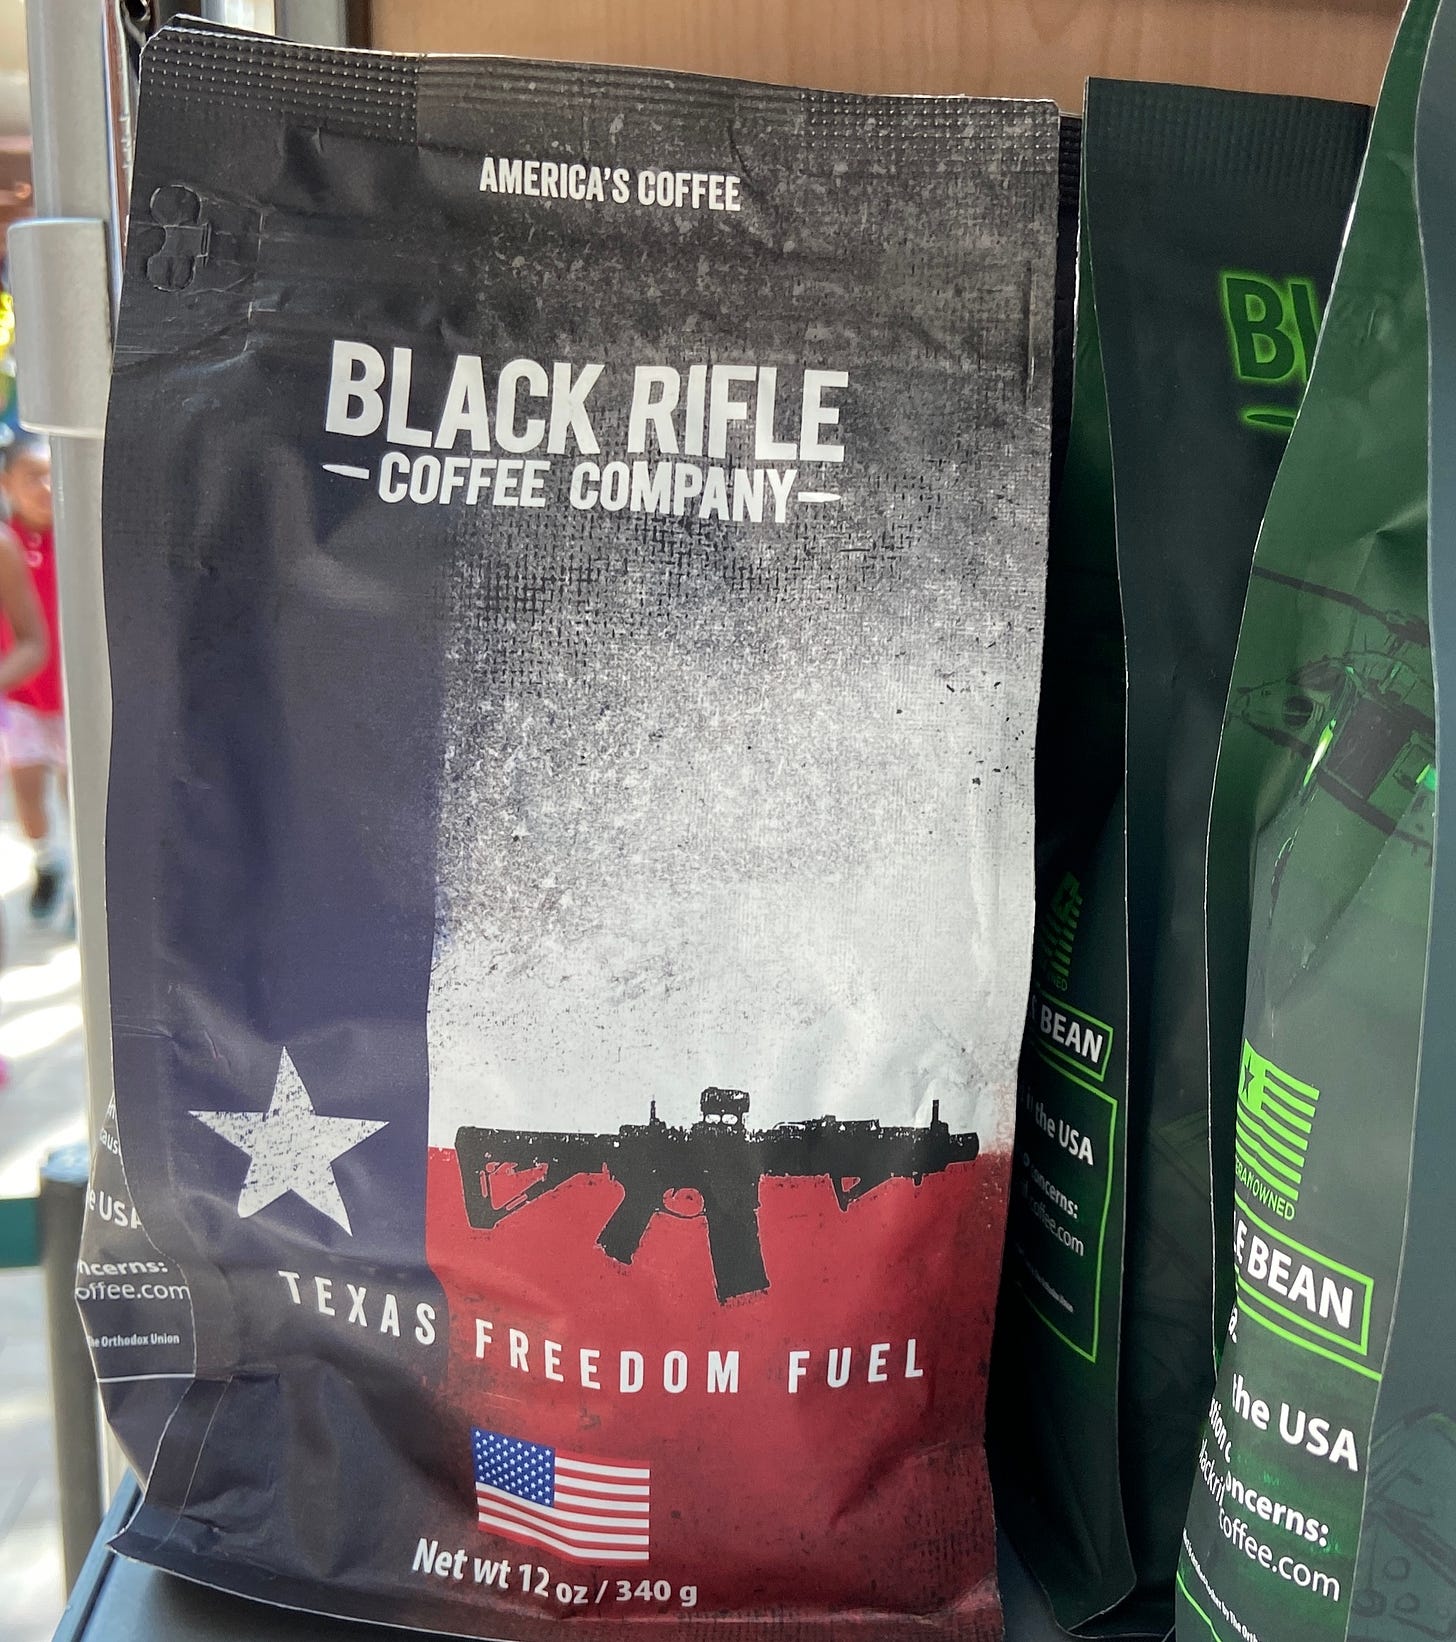 An image of a bag of coffee named "Texas Freedom Fuel" with a graphic of the Texas flag and an assault rifle.